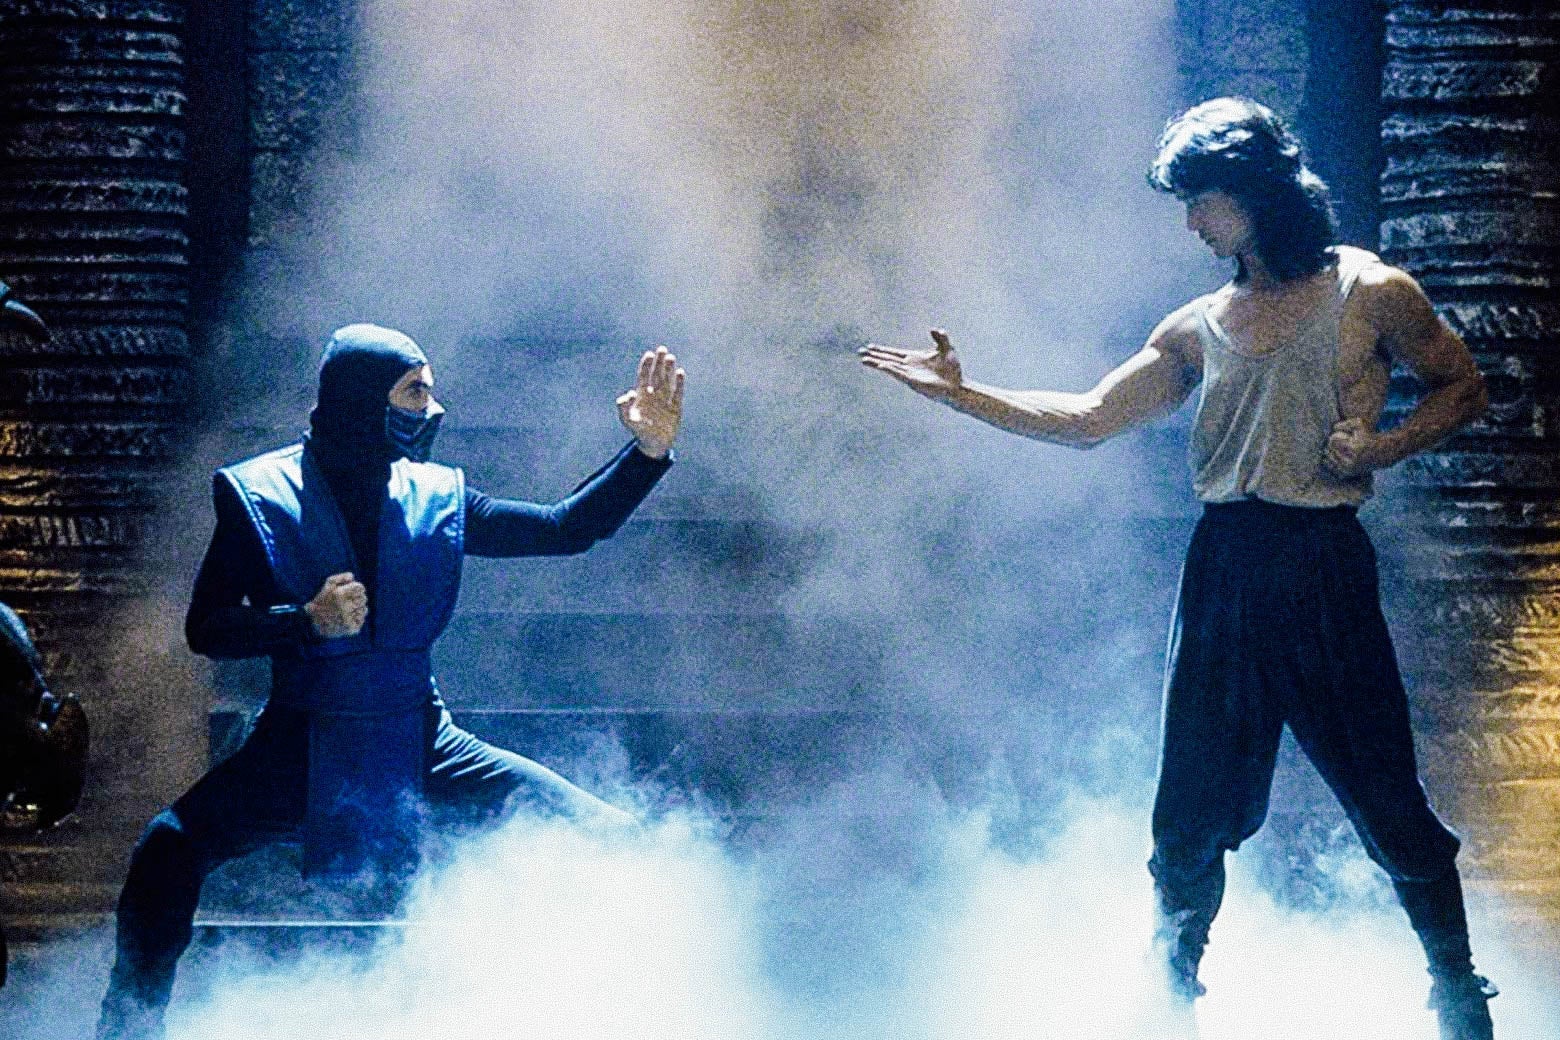 Sub-Zero and Liu Kang face off with fog flowing dramatically around them